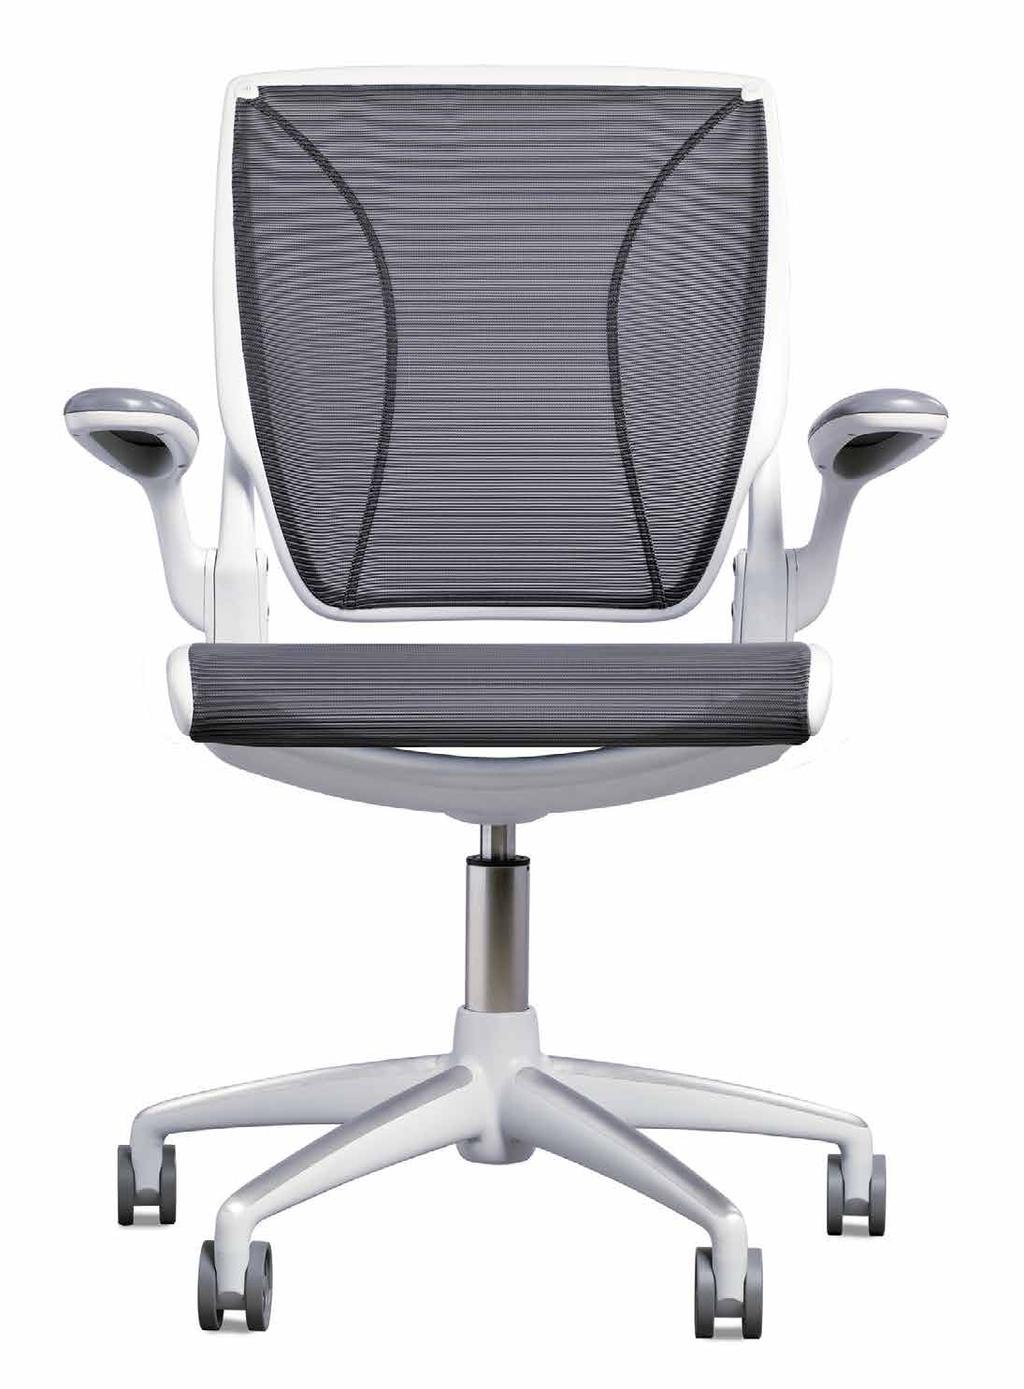 Seating GSA Contract #GS-29F-0001N Task Chair Marking Humanscale s first foray into all-mesh task seating, the